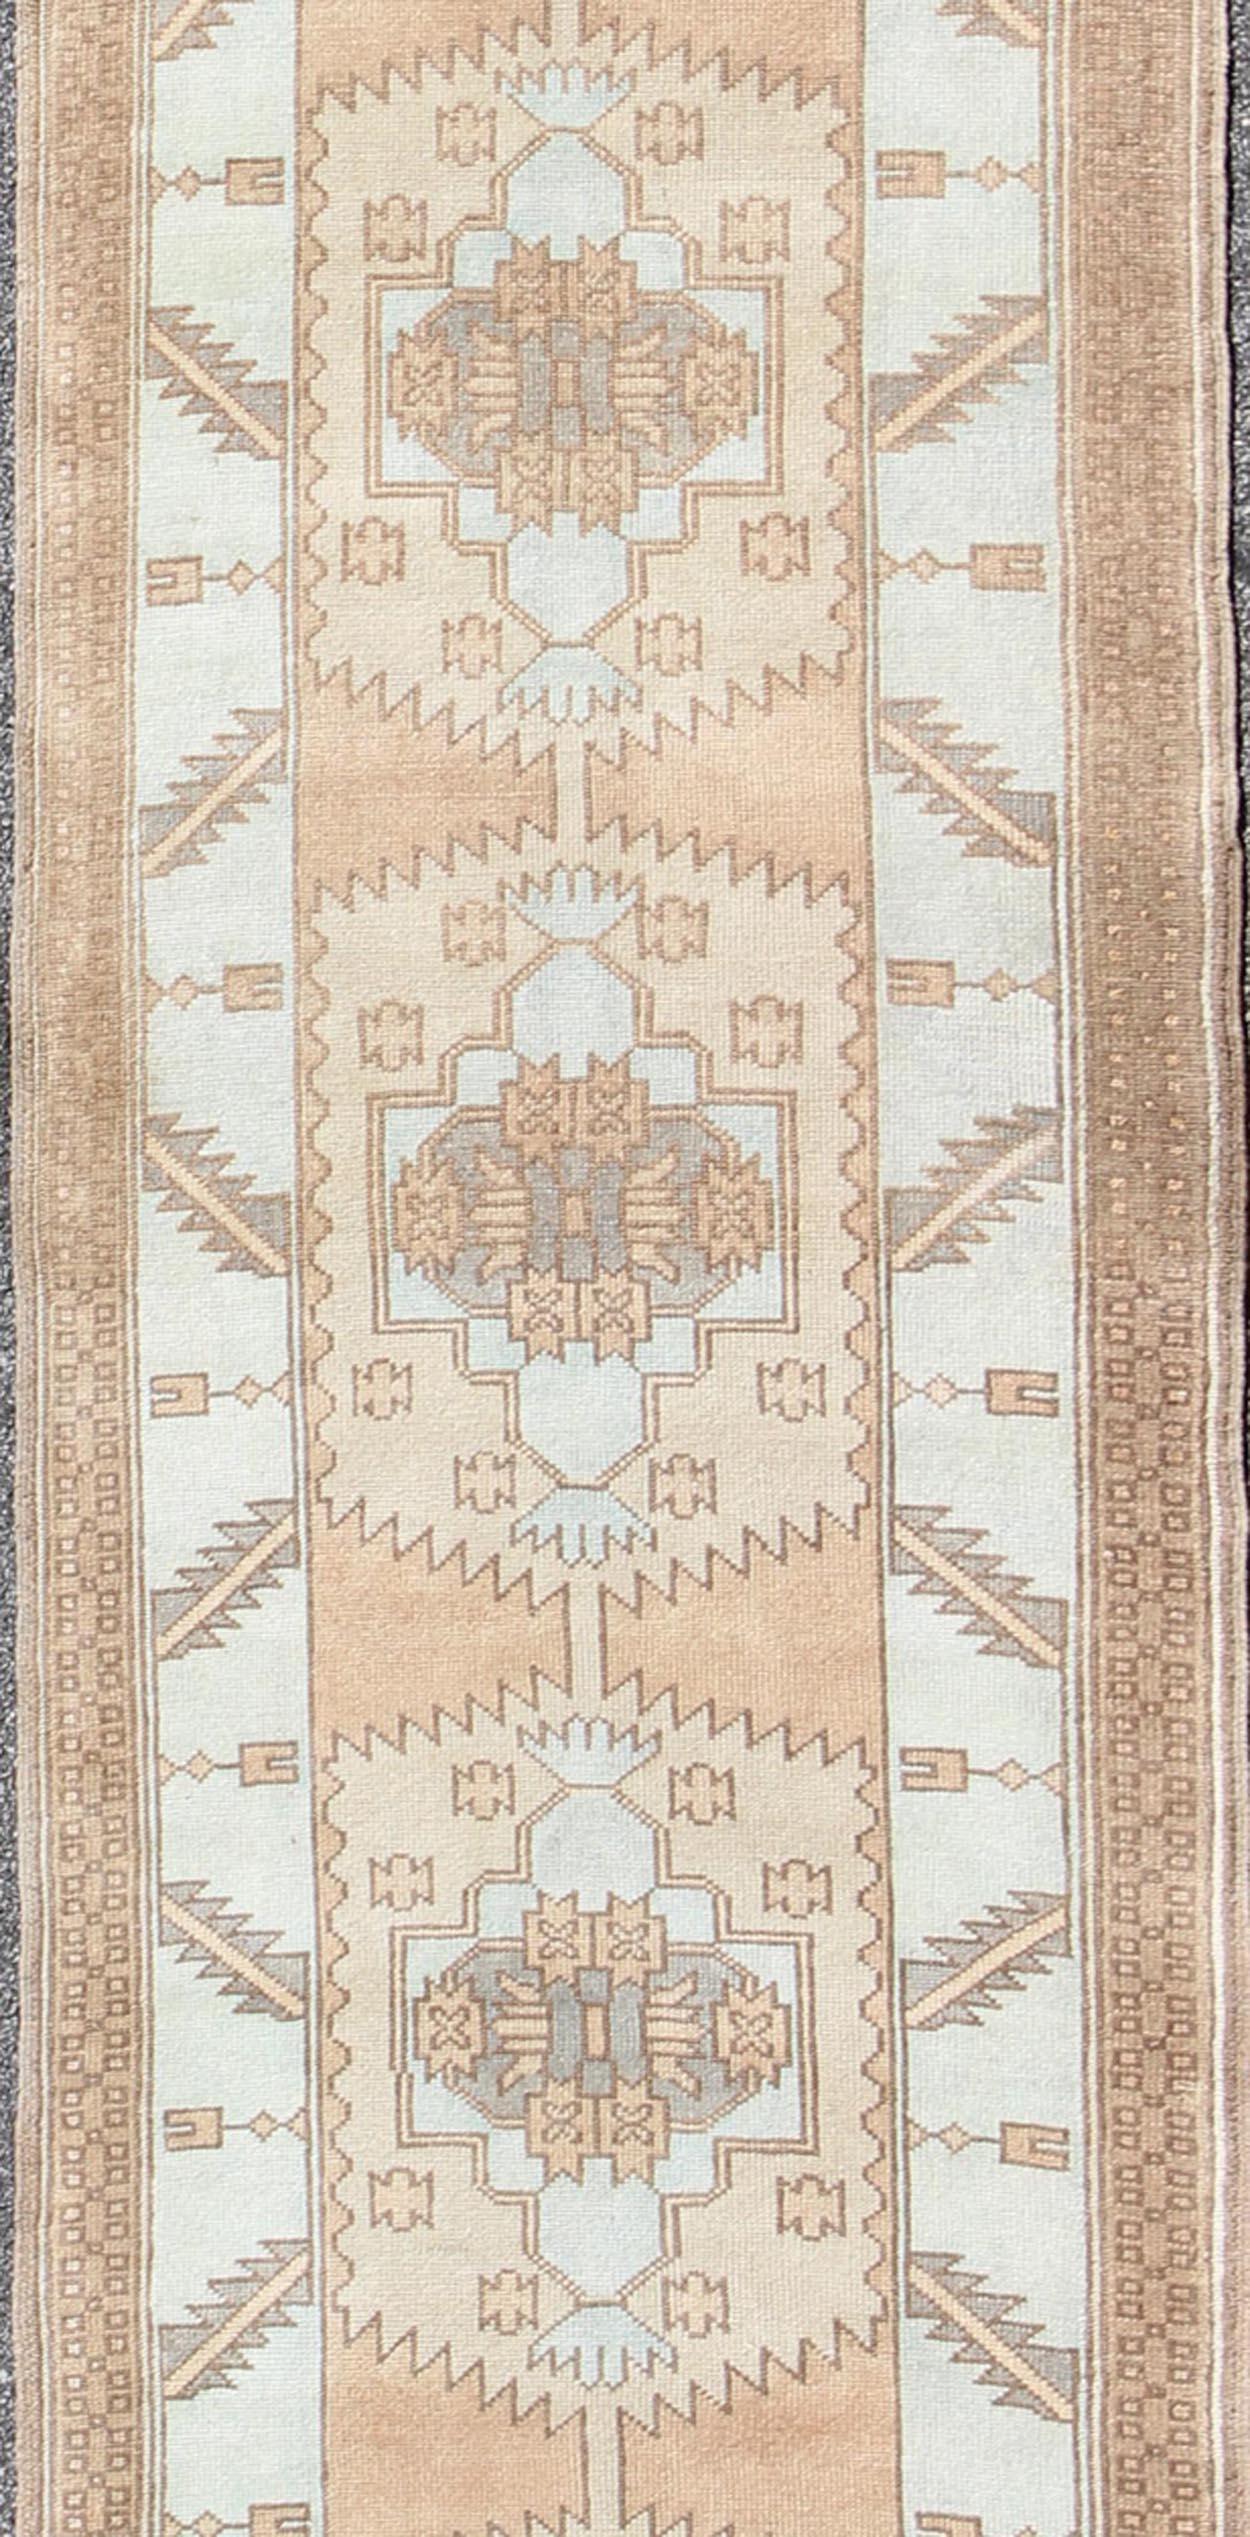 vintage Turkish runner with geometric design in ice blue and taupe
Vintage Oushak runner from Turkey with Medallion design in various color tones, Keivan Woven Arts / rug EN-179546, country of origin / type: Turkey / Oushak, circa 1940

This